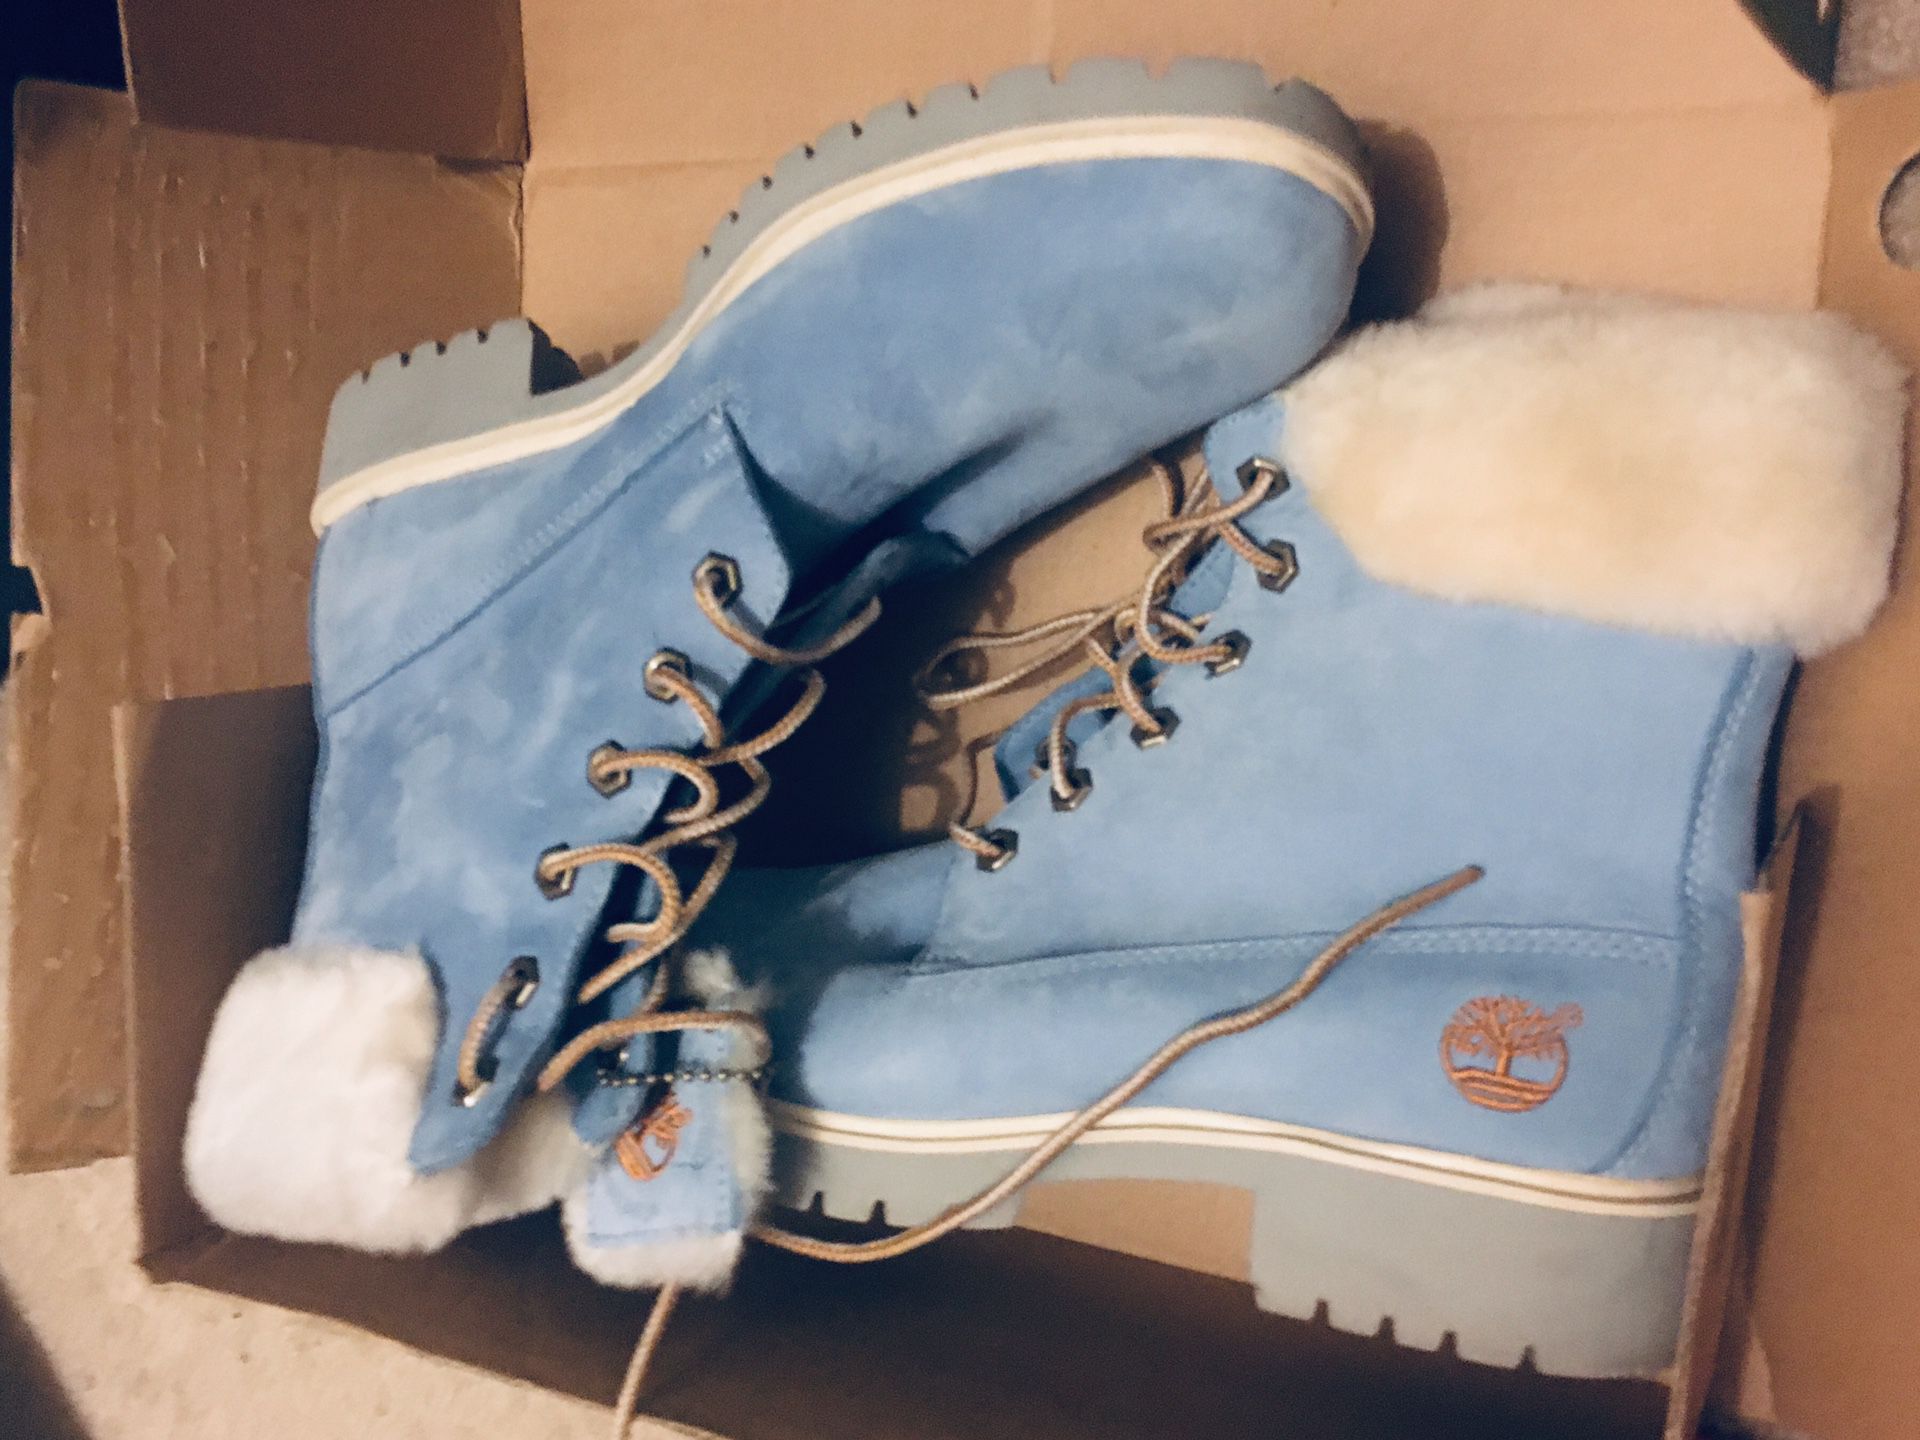 Ladies size 8 Timberlands boots